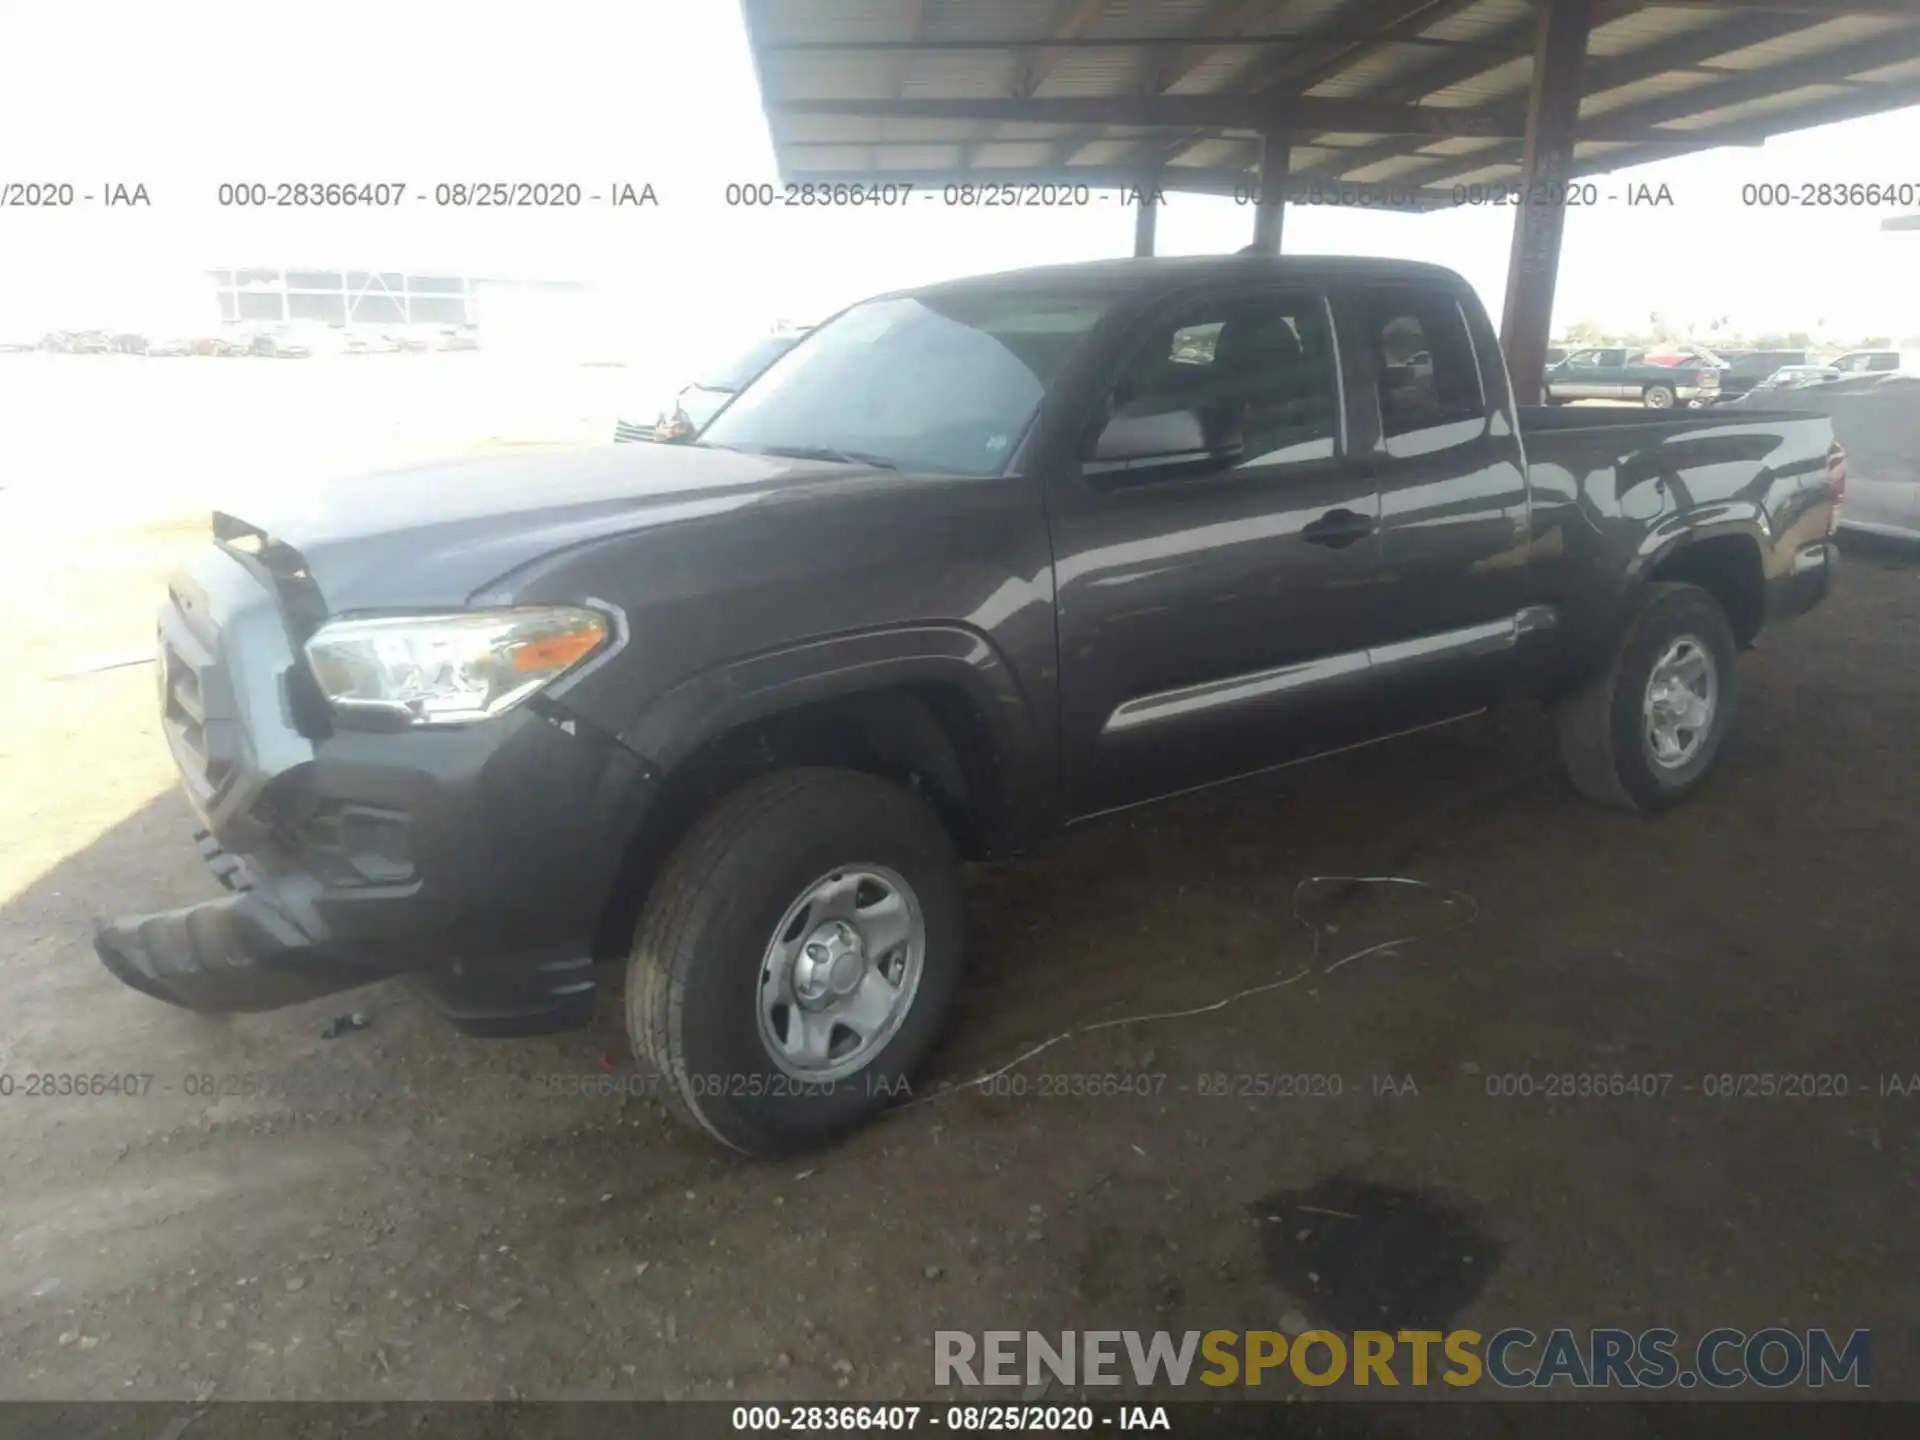 2 Photograph of a damaged car 3TYRX5GN9LT001185 TOYOTA TACOMA 2WD 2020